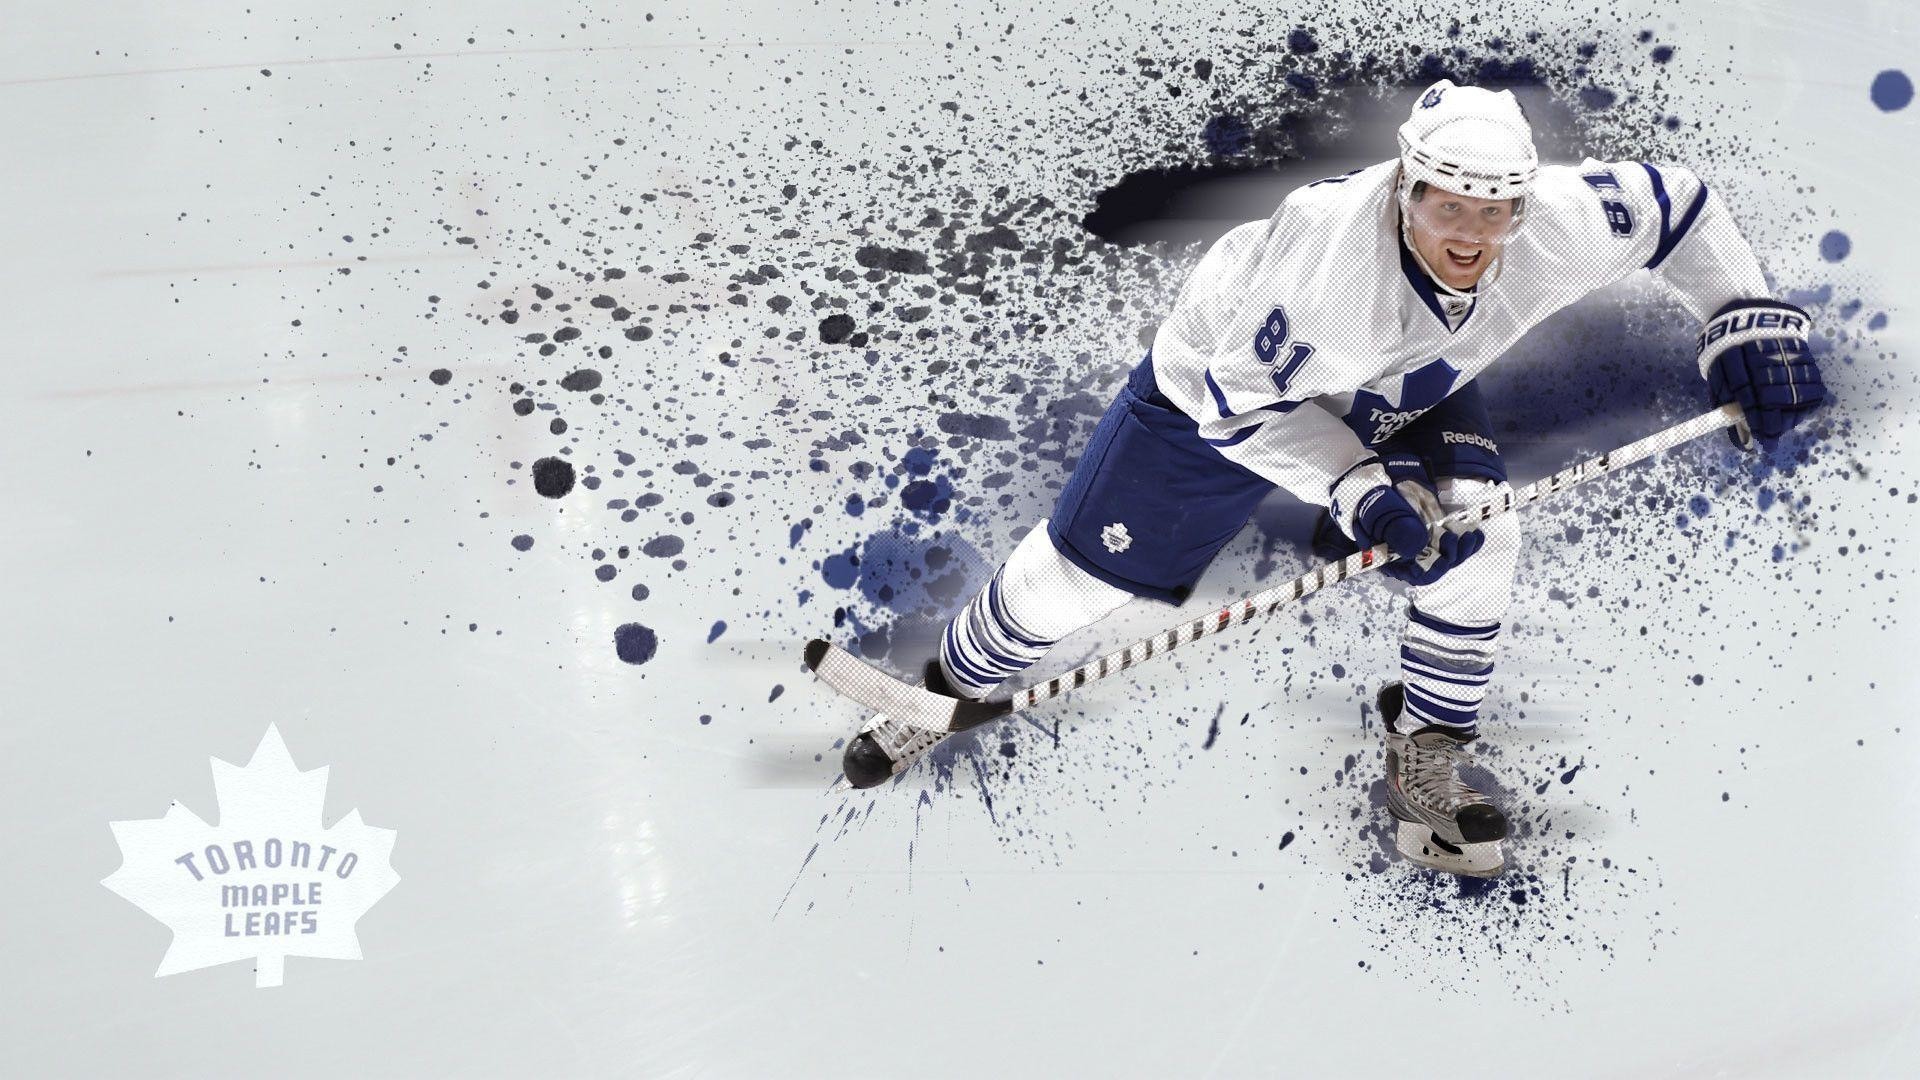 1920x1080 Toronto Maple Leafs background | Toronto Maple Leafs wallpapers